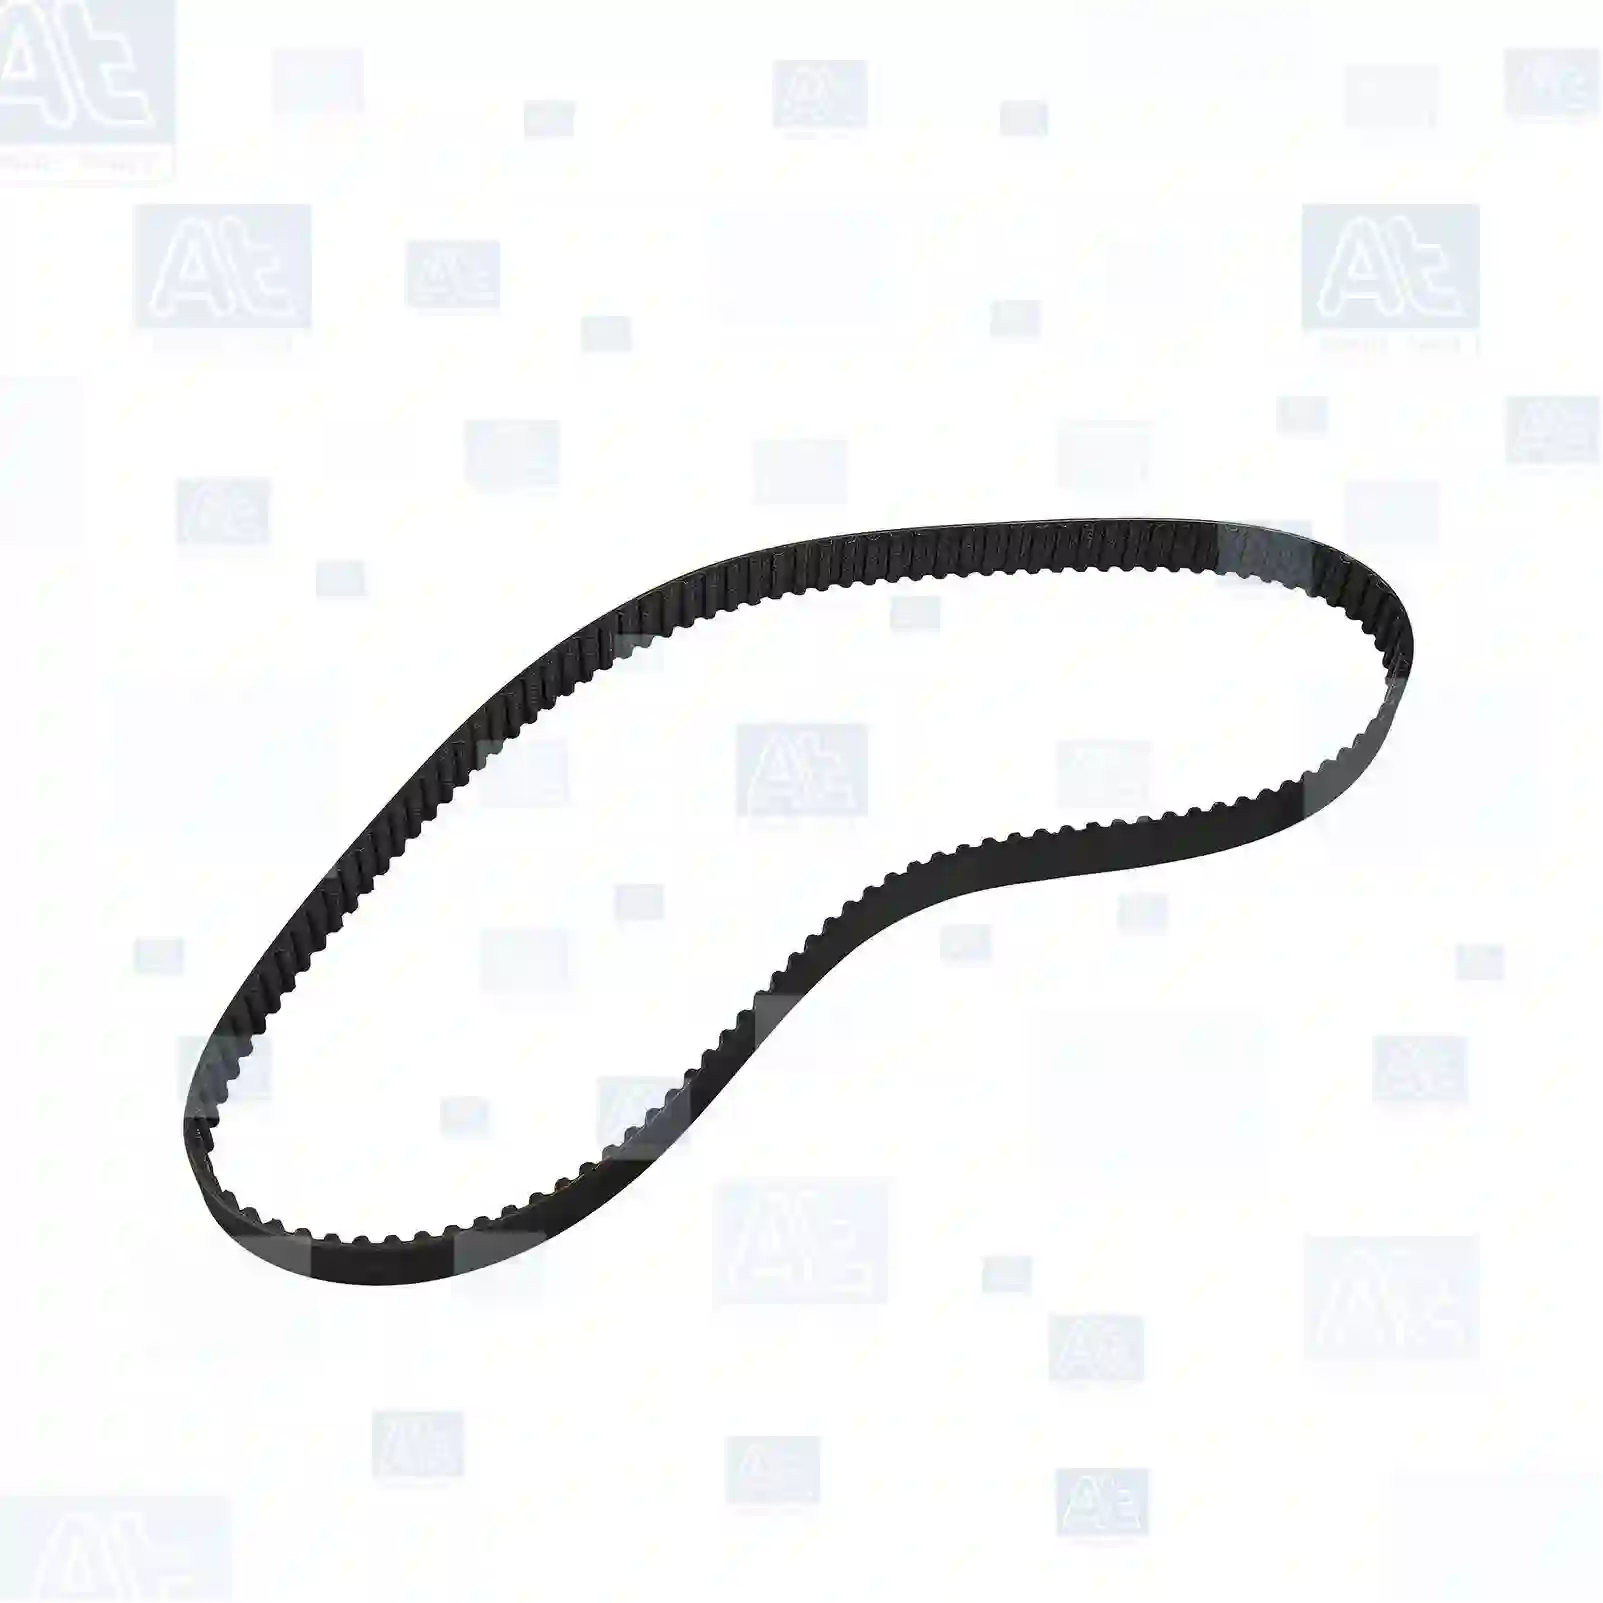 Timing belt, 77709224, 081699, 0816E5, 98419390, 99456476, 4403027, 4500831, 9111027, 9161131, 98419390, 4403027, 4500831, 9111027, 9161131, 98149390, 02997807, 2997807, 500055907, 7701043483, 98419390, 99456476, 98419390, 4403027, 4500831, 081699, 0816E5, 0099456476, 5001836605, 7701035242, 7701043483 ||  77709224 At Spare Part | Engine, Accelerator Pedal, Camshaft, Connecting Rod, Crankcase, Crankshaft, Cylinder Head, Engine Suspension Mountings, Exhaust Manifold, Exhaust Gas Recirculation, Filter Kits, Flywheel Housing, General Overhaul Kits, Engine, Intake Manifold, Oil Cleaner, Oil Cooler, Oil Filter, Oil Pump, Oil Sump, Piston & Liner, Sensor & Switch, Timing Case, Turbocharger, Cooling System, Belt Tensioner, Coolant Filter, Coolant Pipe, Corrosion Prevention Agent, Drive, Expansion Tank, Fan, Intercooler, Monitors & Gauges, Radiator, Thermostat, V-Belt / Timing belt, Water Pump, Fuel System, Electronical Injector Unit, Feed Pump, Fuel Filter, cpl., Fuel Gauge Sender,  Fuel Line, Fuel Pump, Fuel Tank, Injection Line Kit, Injection Pump, Exhaust System, Clutch & Pedal, Gearbox, Propeller Shaft, Axles, Brake System, Hubs & Wheels, Suspension, Leaf Spring, Universal Parts / Accessories, Steering, Electrical System, Cabin Timing belt, 77709224, 081699, 0816E5, 98419390, 99456476, 4403027, 4500831, 9111027, 9161131, 98419390, 4403027, 4500831, 9111027, 9161131, 98149390, 02997807, 2997807, 500055907, 7701043483, 98419390, 99456476, 98419390, 4403027, 4500831, 081699, 0816E5, 0099456476, 5001836605, 7701035242, 7701043483 ||  77709224 At Spare Part | Engine, Accelerator Pedal, Camshaft, Connecting Rod, Crankcase, Crankshaft, Cylinder Head, Engine Suspension Mountings, Exhaust Manifold, Exhaust Gas Recirculation, Filter Kits, Flywheel Housing, General Overhaul Kits, Engine, Intake Manifold, Oil Cleaner, Oil Cooler, Oil Filter, Oil Pump, Oil Sump, Piston & Liner, Sensor & Switch, Timing Case, Turbocharger, Cooling System, Belt Tensioner, Coolant Filter, Coolant Pipe, Corrosion Prevention Agent, Drive, Expansion Tank, Fan, Intercooler, Monitors & Gauges, Radiator, Thermostat, V-Belt / Timing belt, Water Pump, Fuel System, Electronical Injector Unit, Feed Pump, Fuel Filter, cpl., Fuel Gauge Sender,  Fuel Line, Fuel Pump, Fuel Tank, Injection Line Kit, Injection Pump, Exhaust System, Clutch & Pedal, Gearbox, Propeller Shaft, Axles, Brake System, Hubs & Wheels, Suspension, Leaf Spring, Universal Parts / Accessories, Steering, Electrical System, Cabin